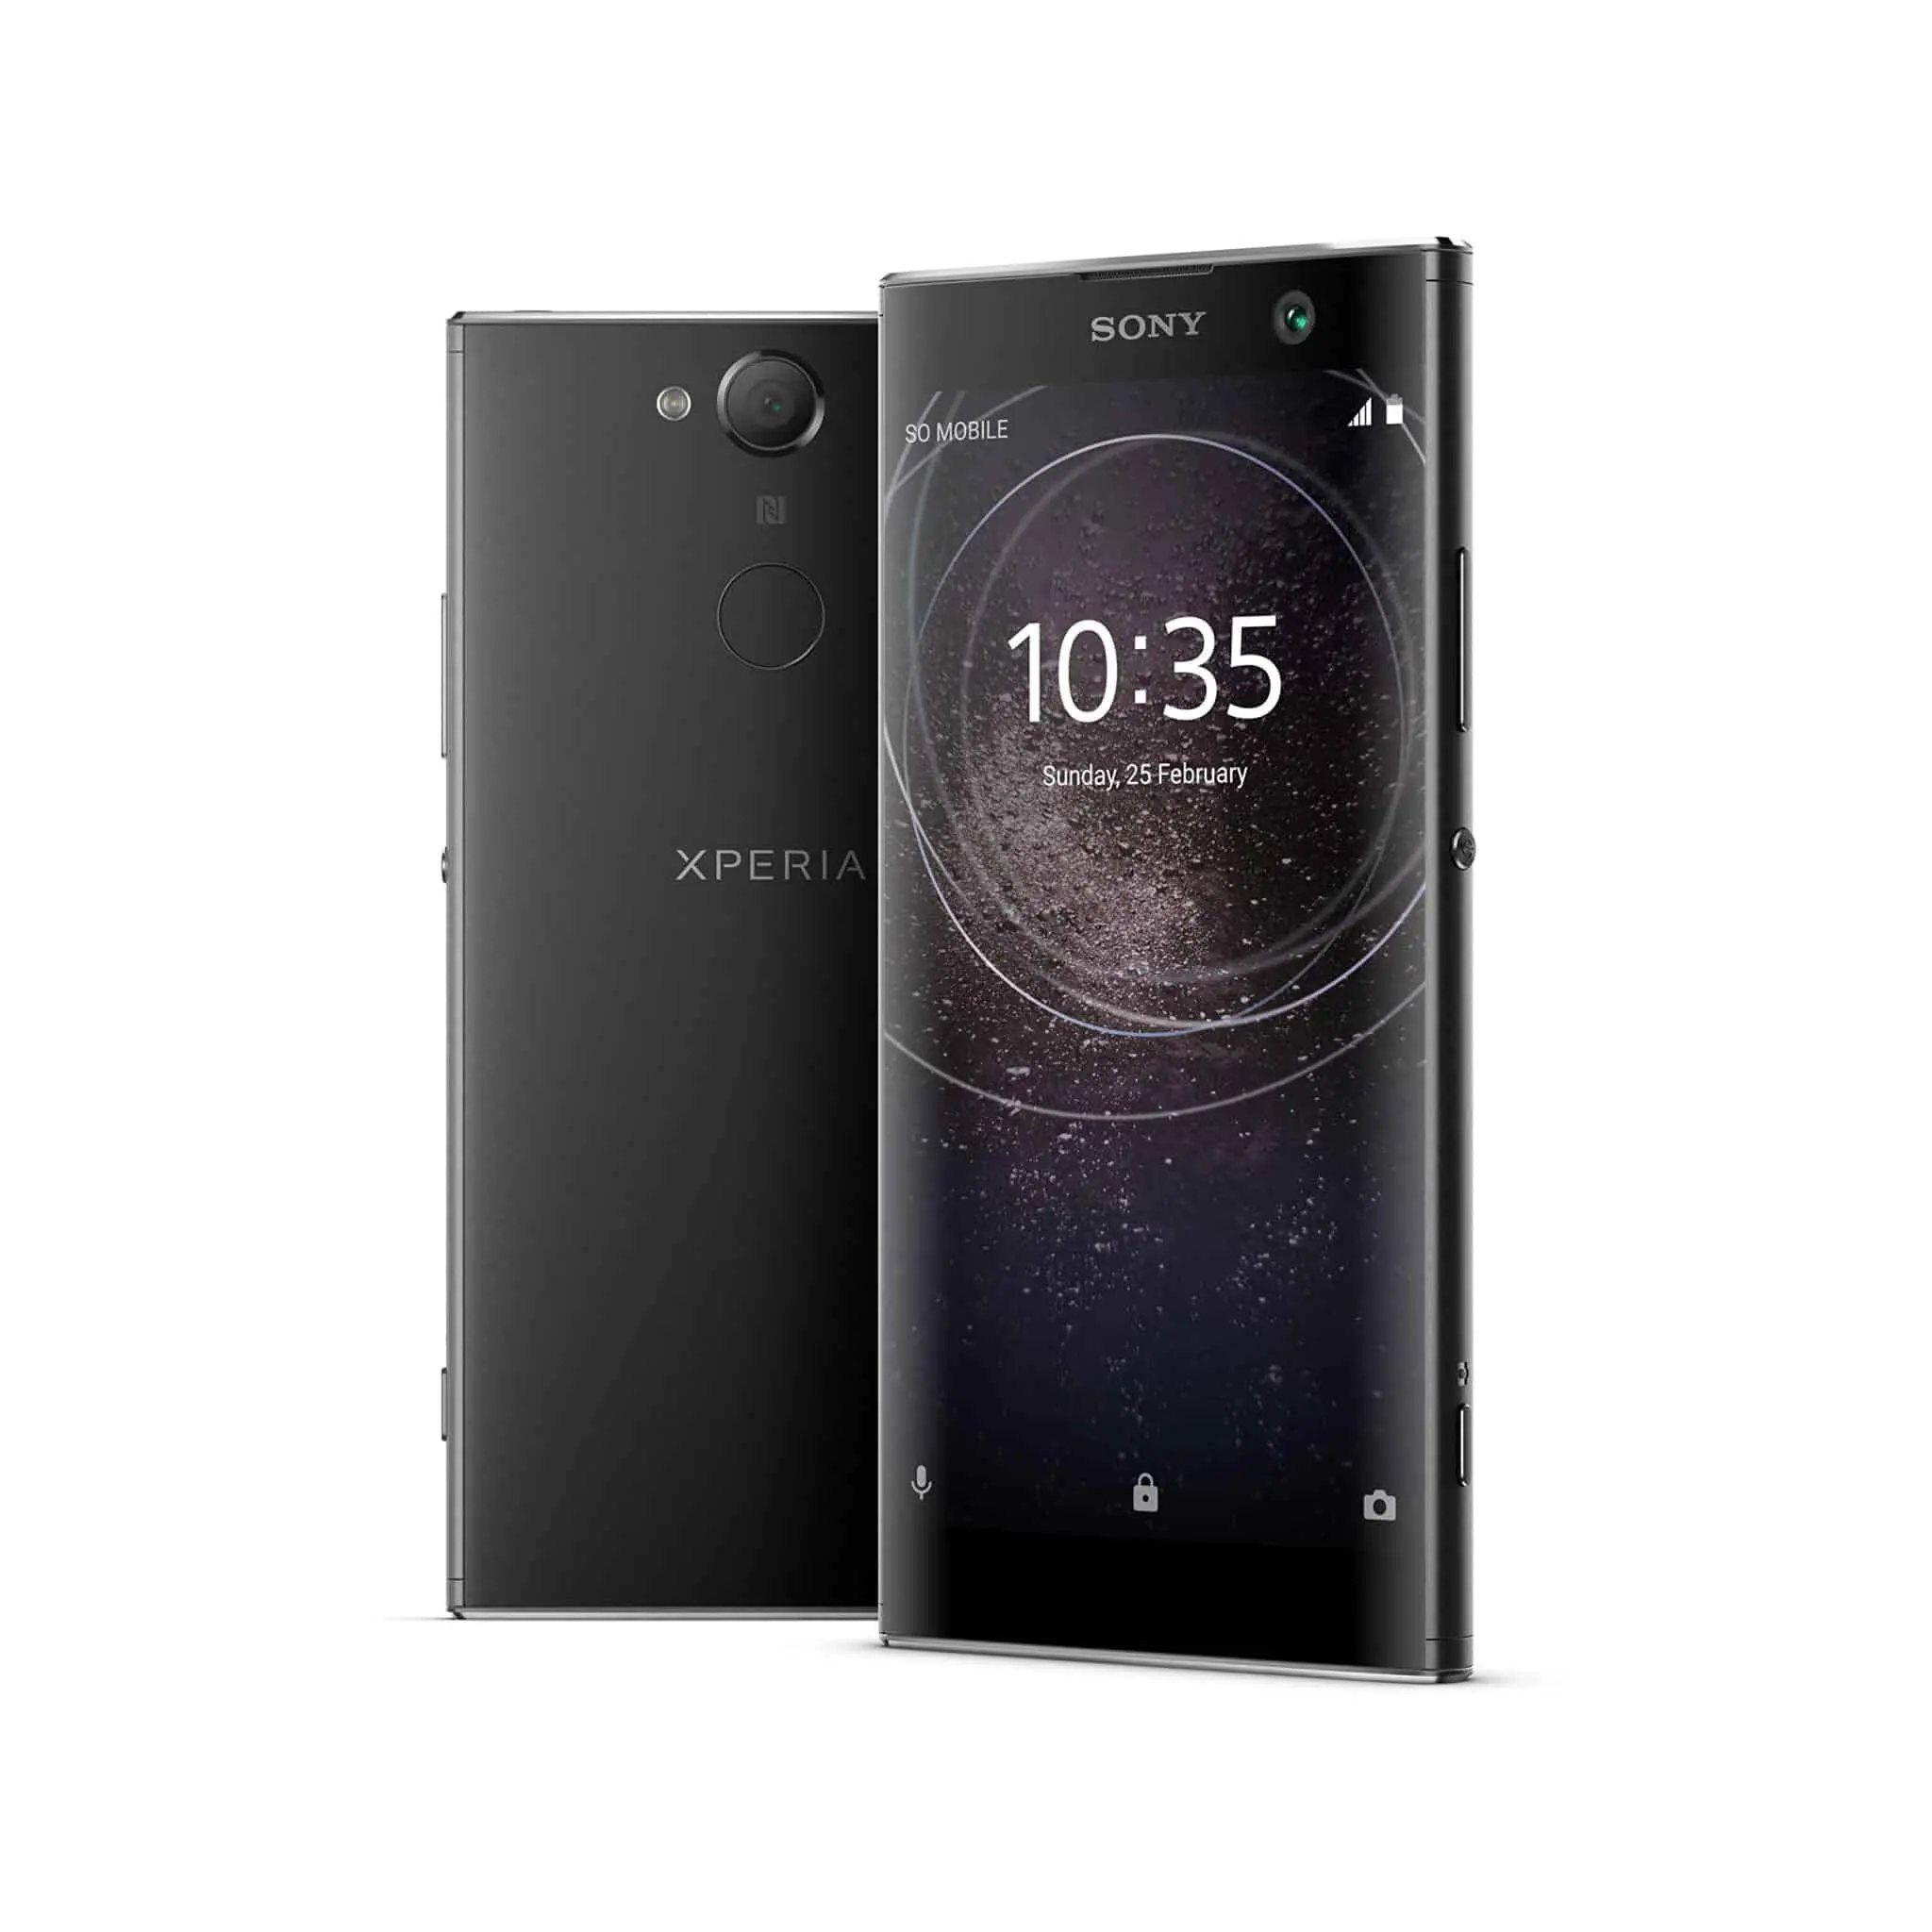 Xperia XA2 review: Capture your moment!